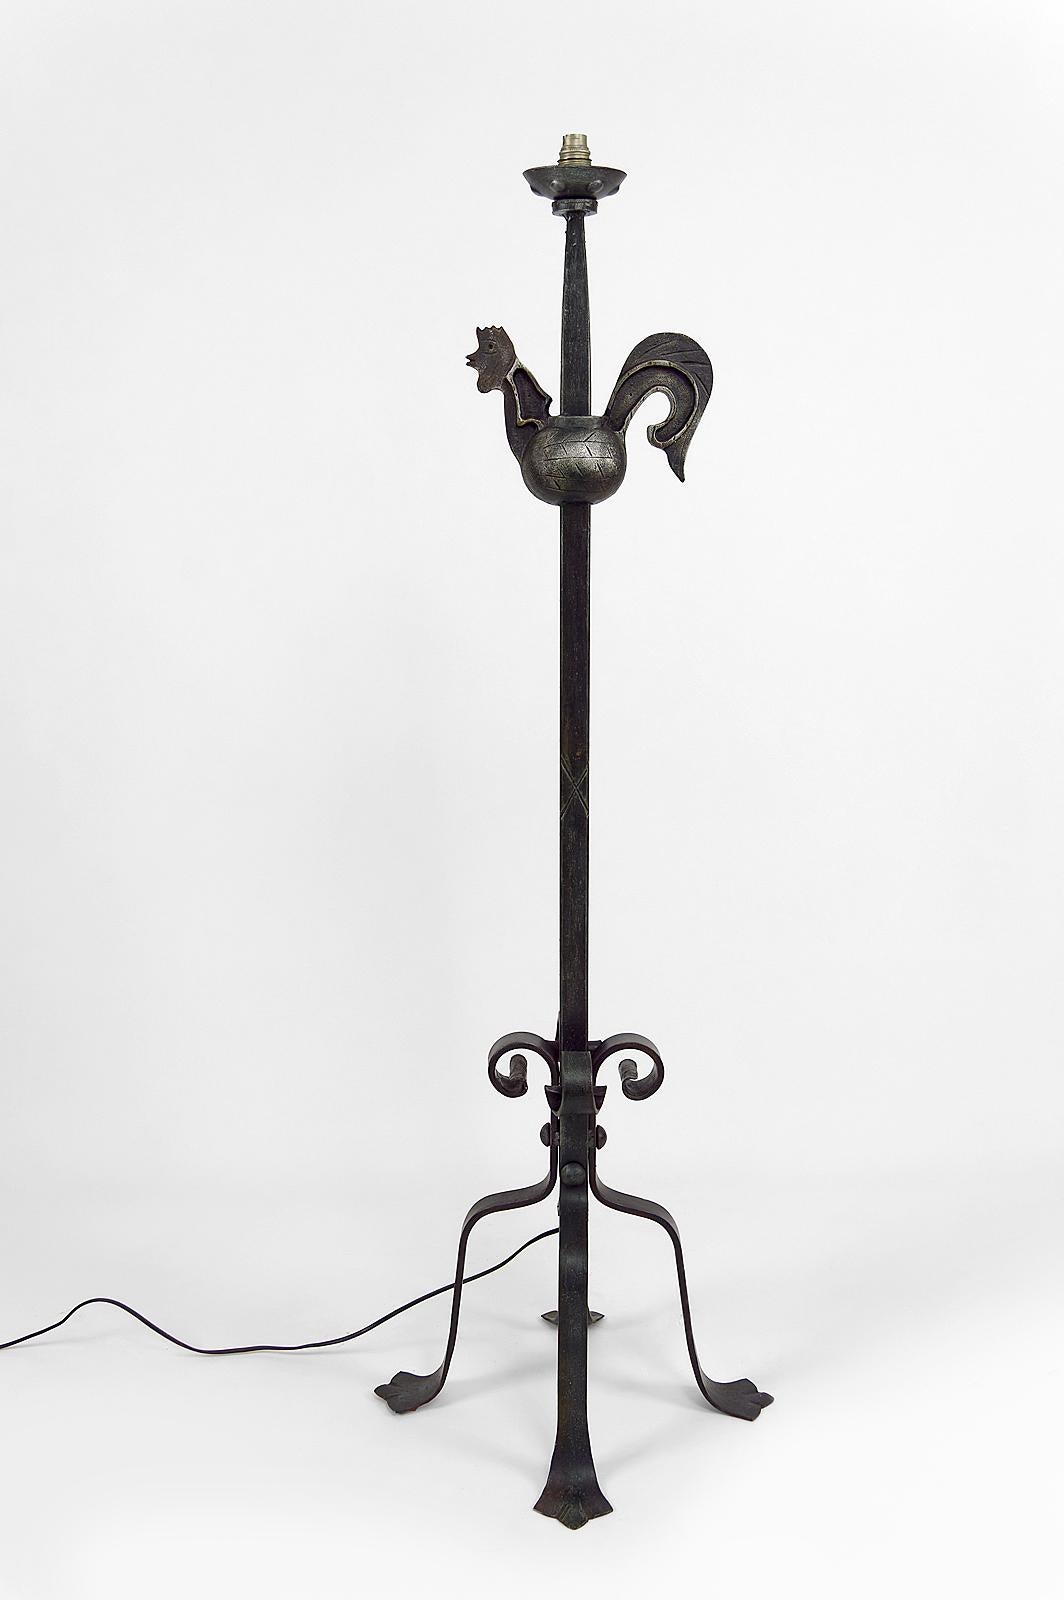 Beautiful quadripod floor lamp depicting a rooster, in wrought and hammered iron.

Mid-Century Modern, France, circa 1950-1960.

By Jean Touret (1916-2004), French sculptor and designer, settled in the city of Marolles after the Second World